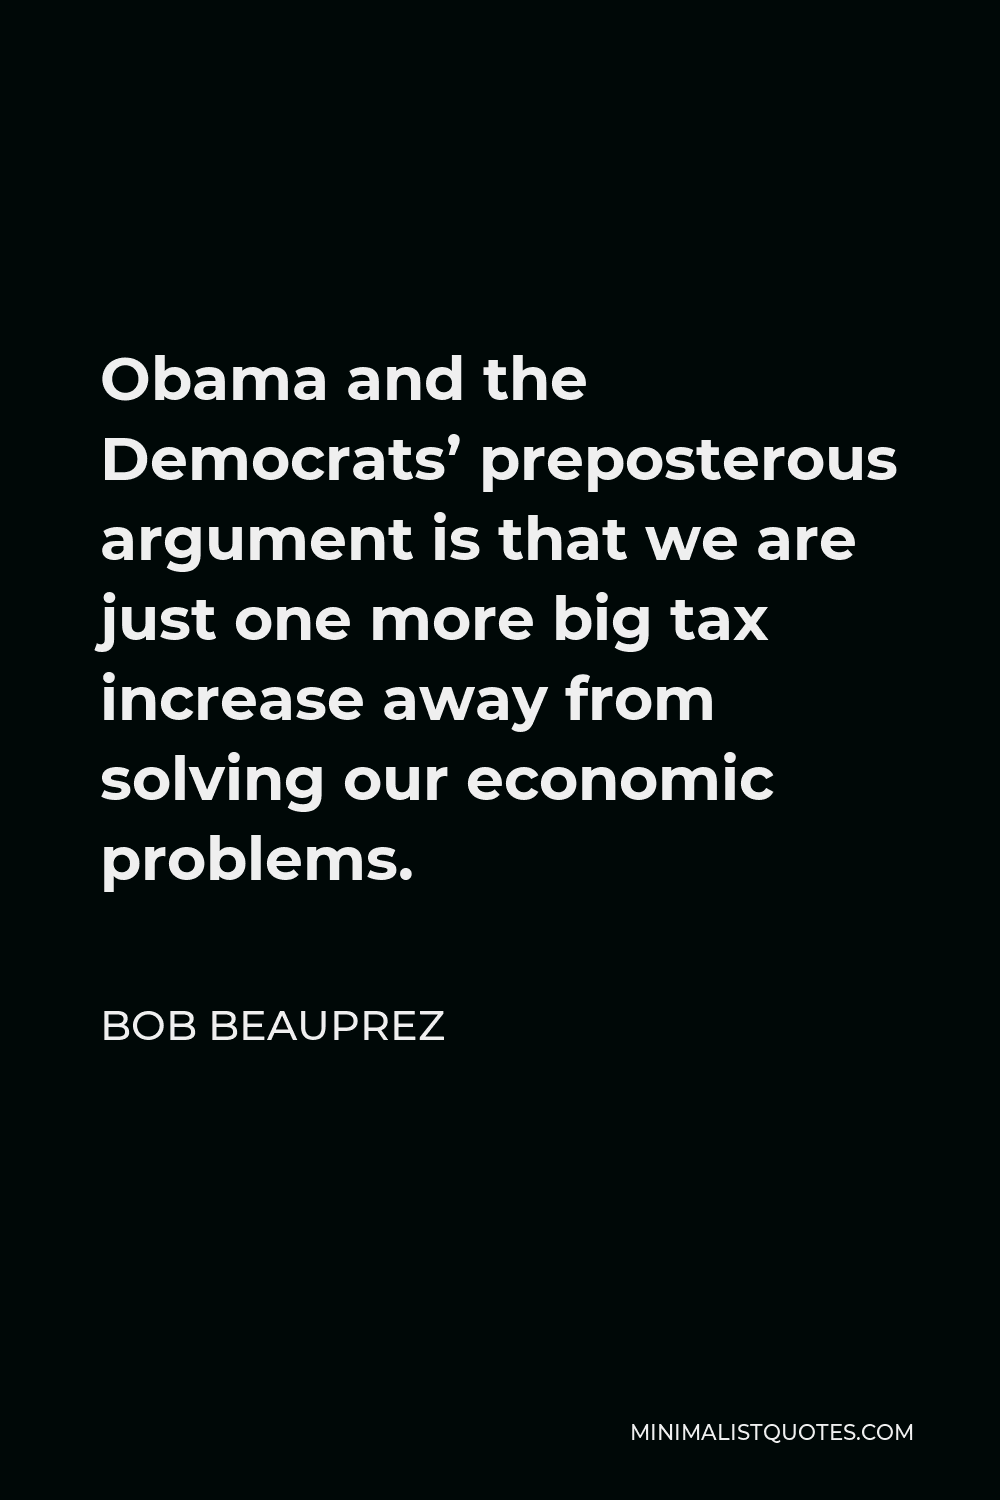 Bob Beauprez Quote - Obama and the Democrats’ preposterous argument is that we are just one more big tax increase away from solving our economic problems.